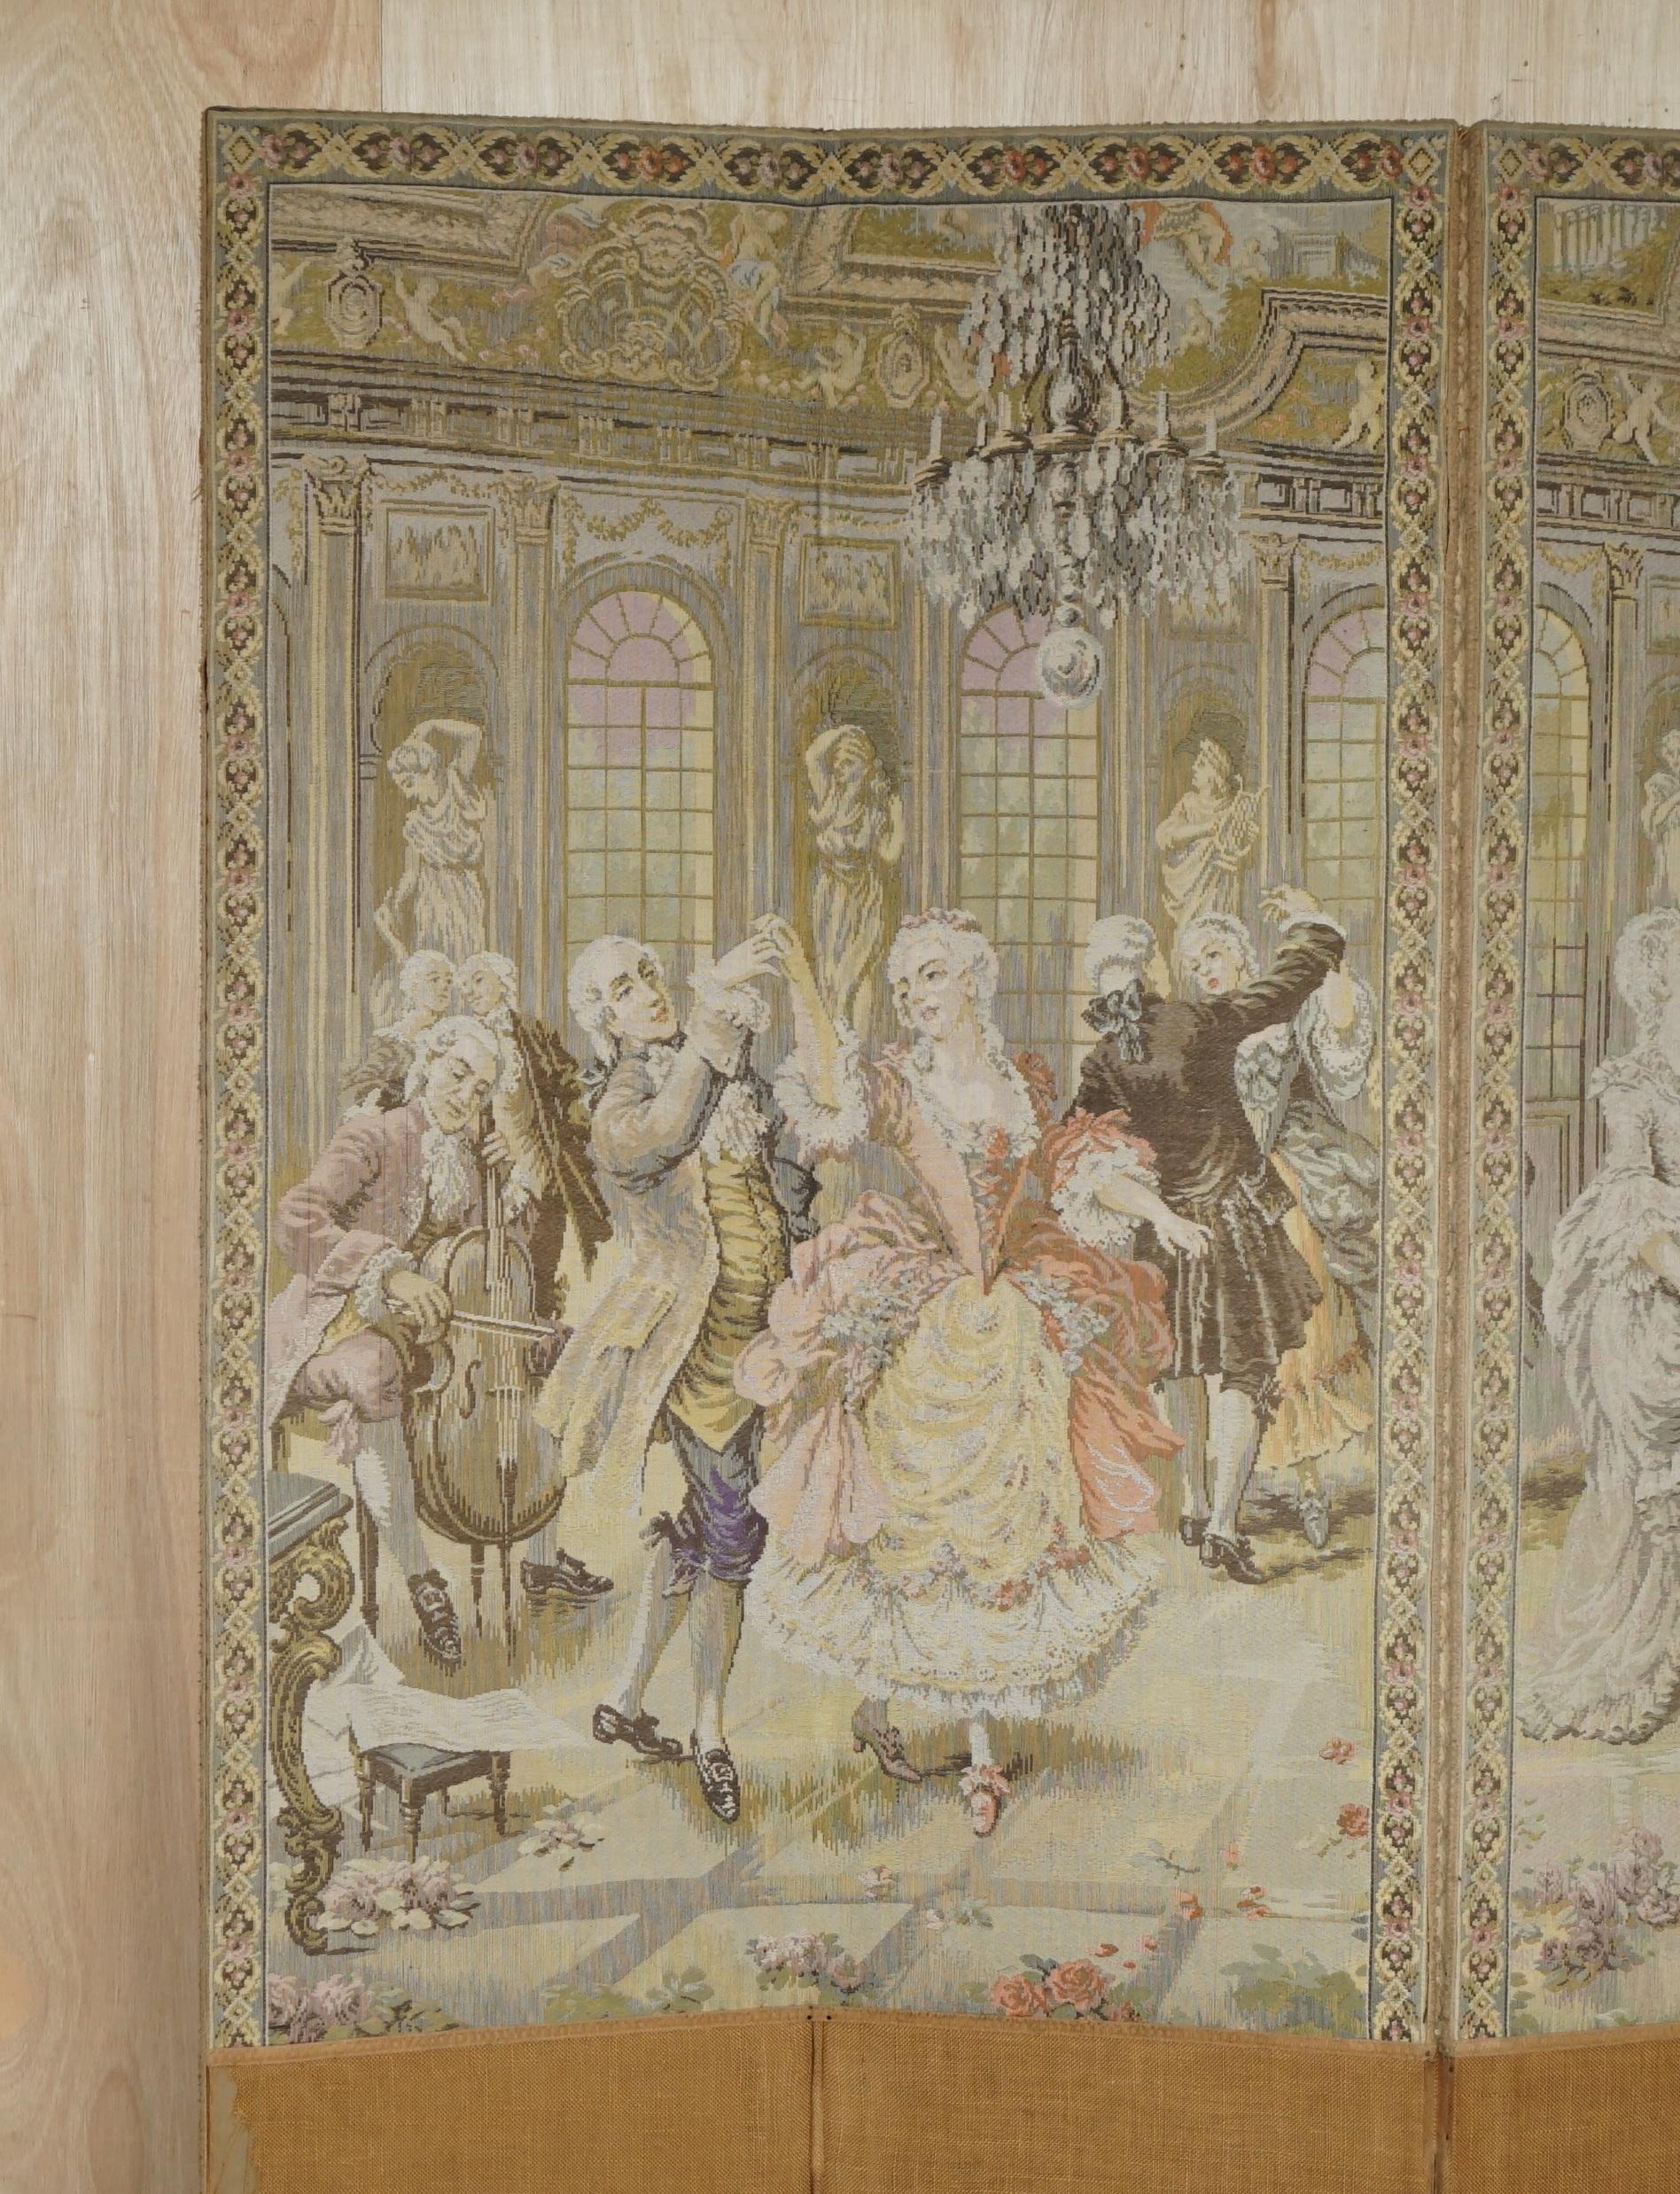 Royal House Antiques

Royal House Antiques is delighted to offer for sale this very decorative handmade Victorian four panel Tapestry folding screen depicting Nobles having a good time wining dining and dancing to live music 

Please note the